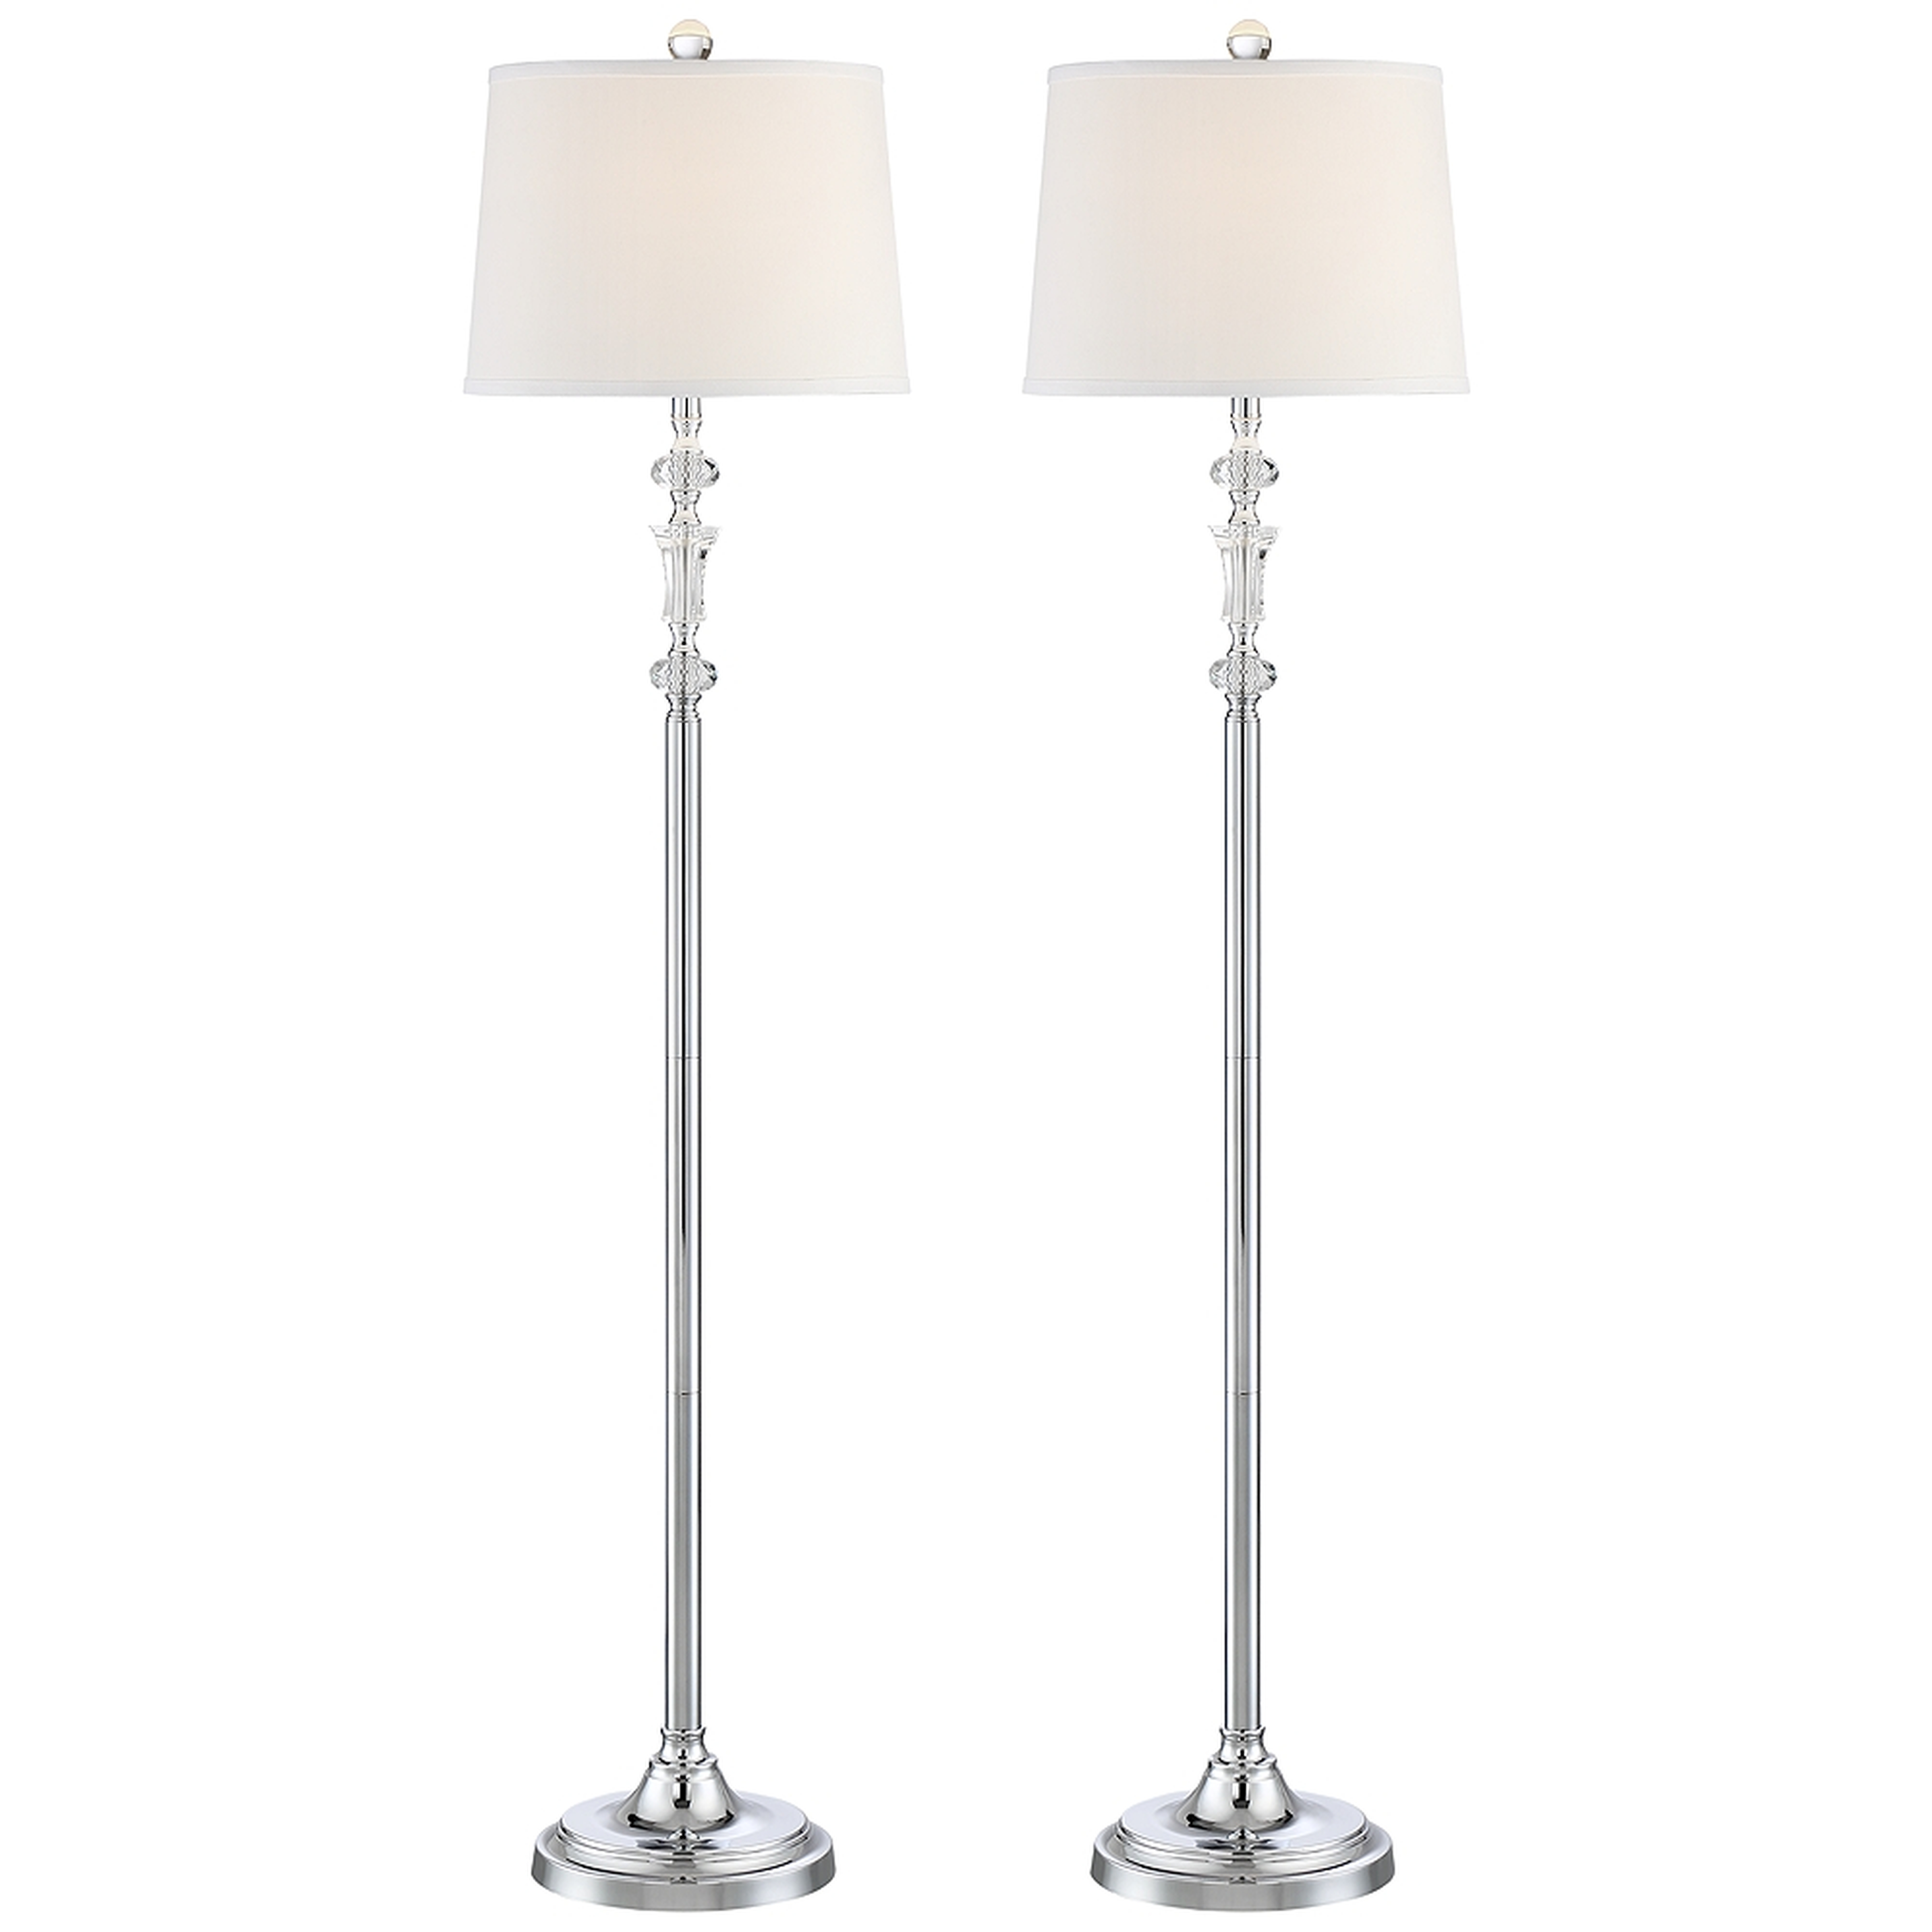 Montrose Floor Lamp Crystal and Metal Set of 2 - Style # 35G61 - Lamps Plus